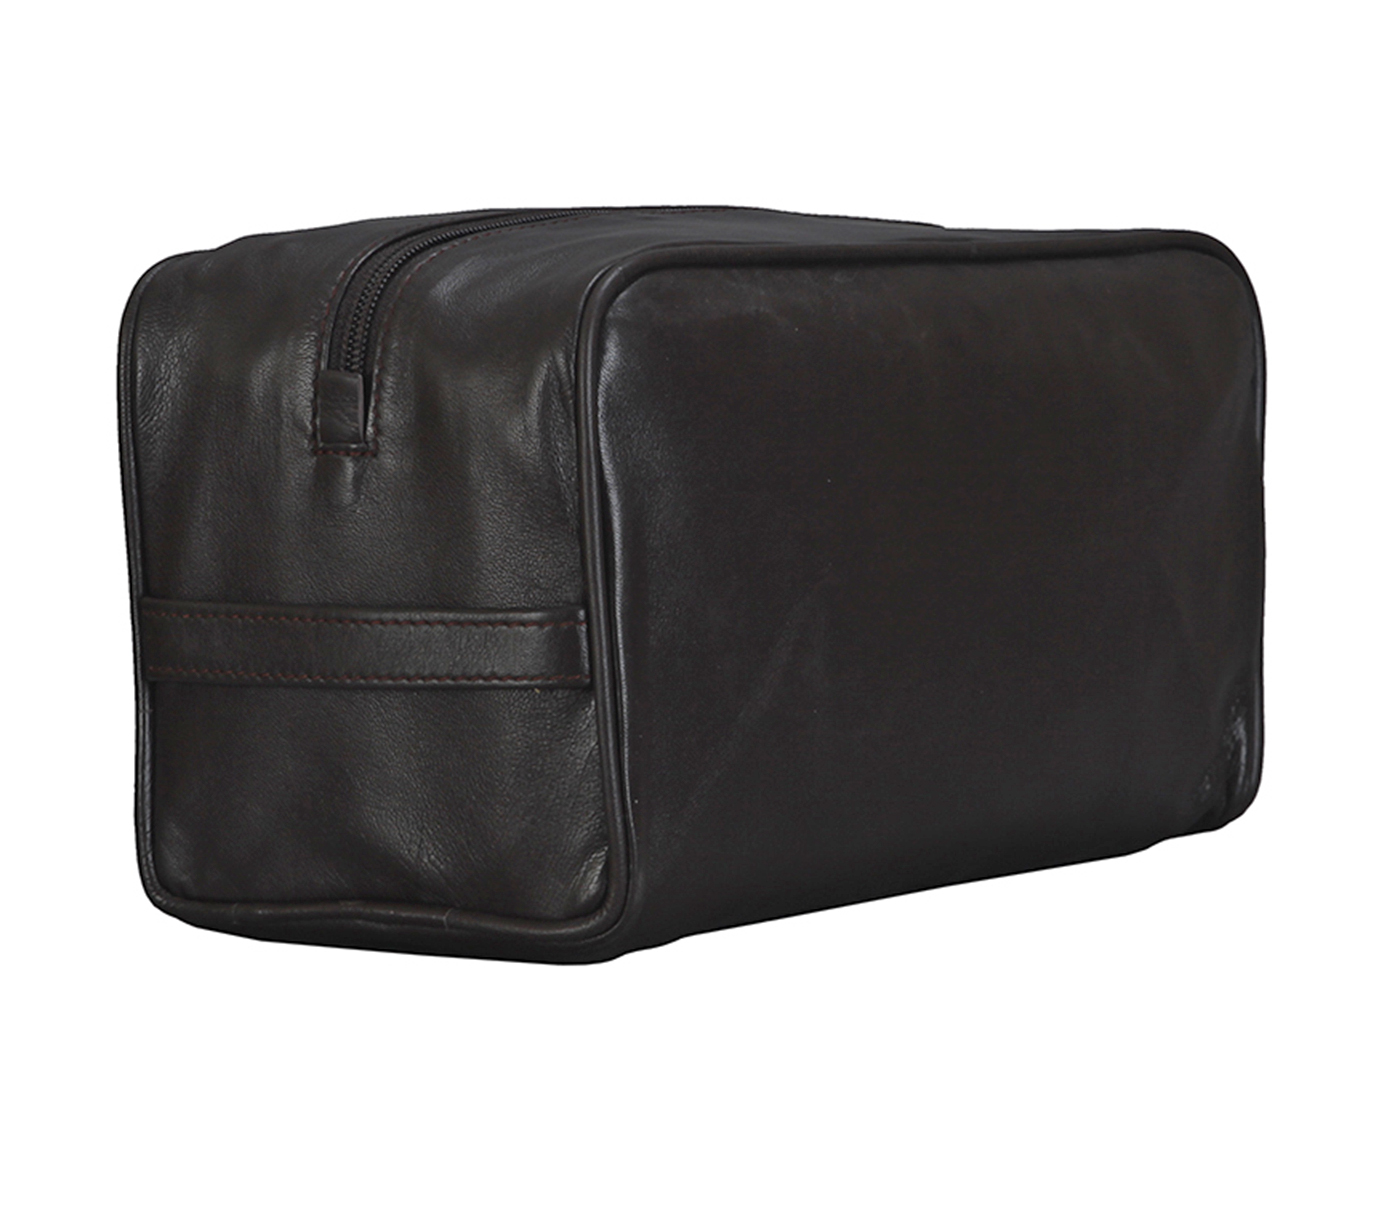 SC2--Unisex Wash & Toiletry travel Bag in Genuine Leather - Brown